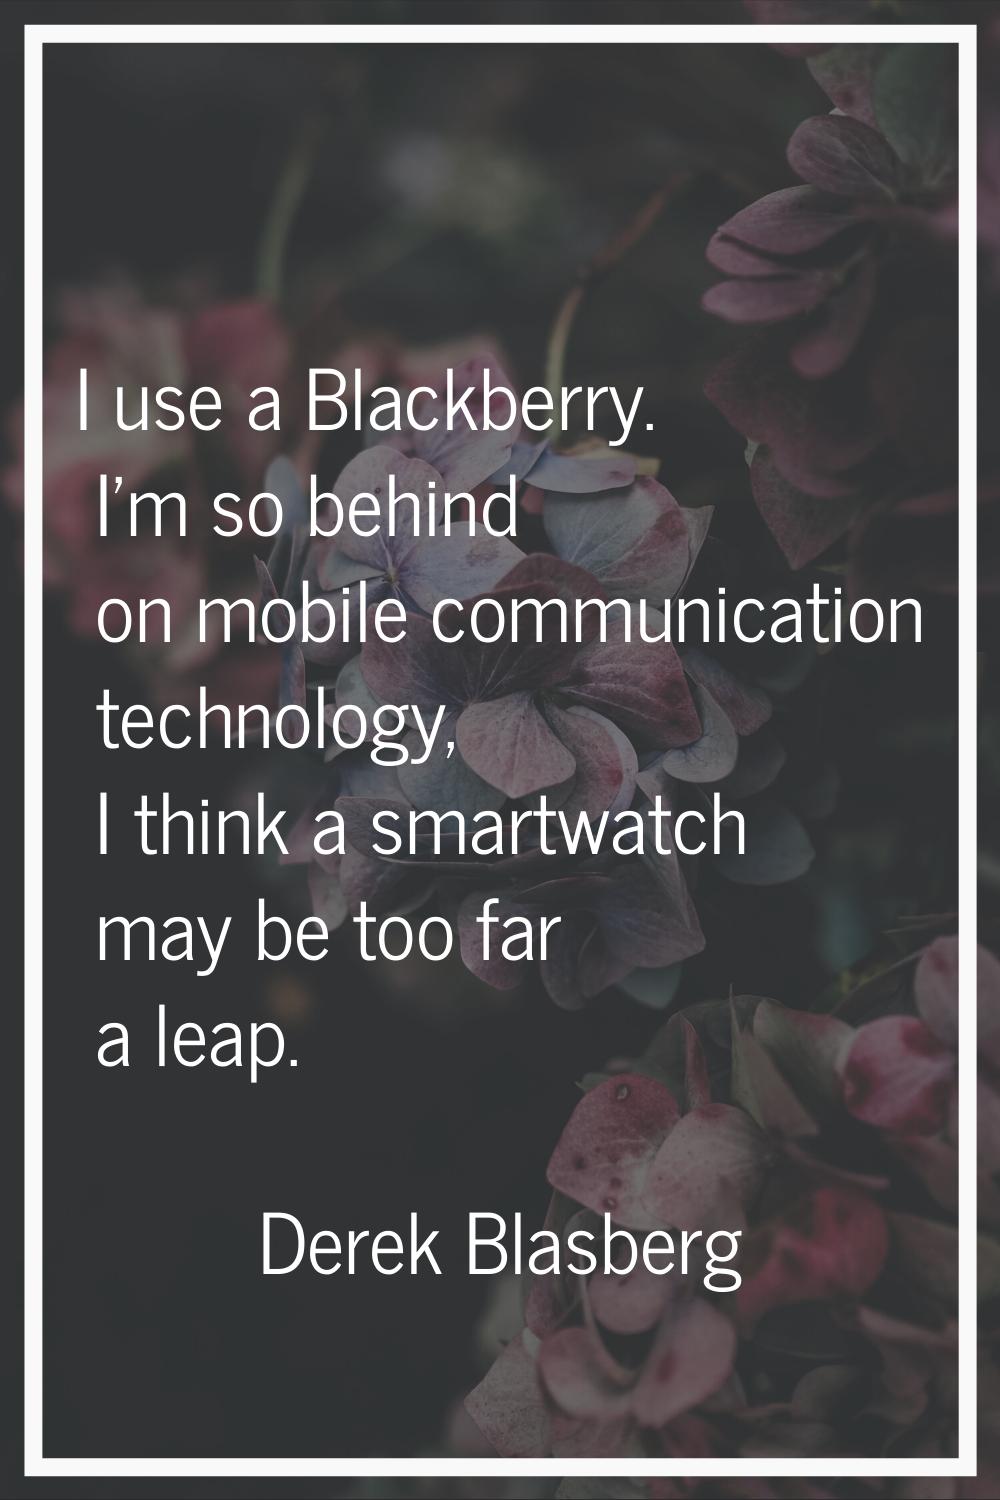 I use a Blackberry. I'm so behind on mobile communication technology, I think a smartwatch may be t